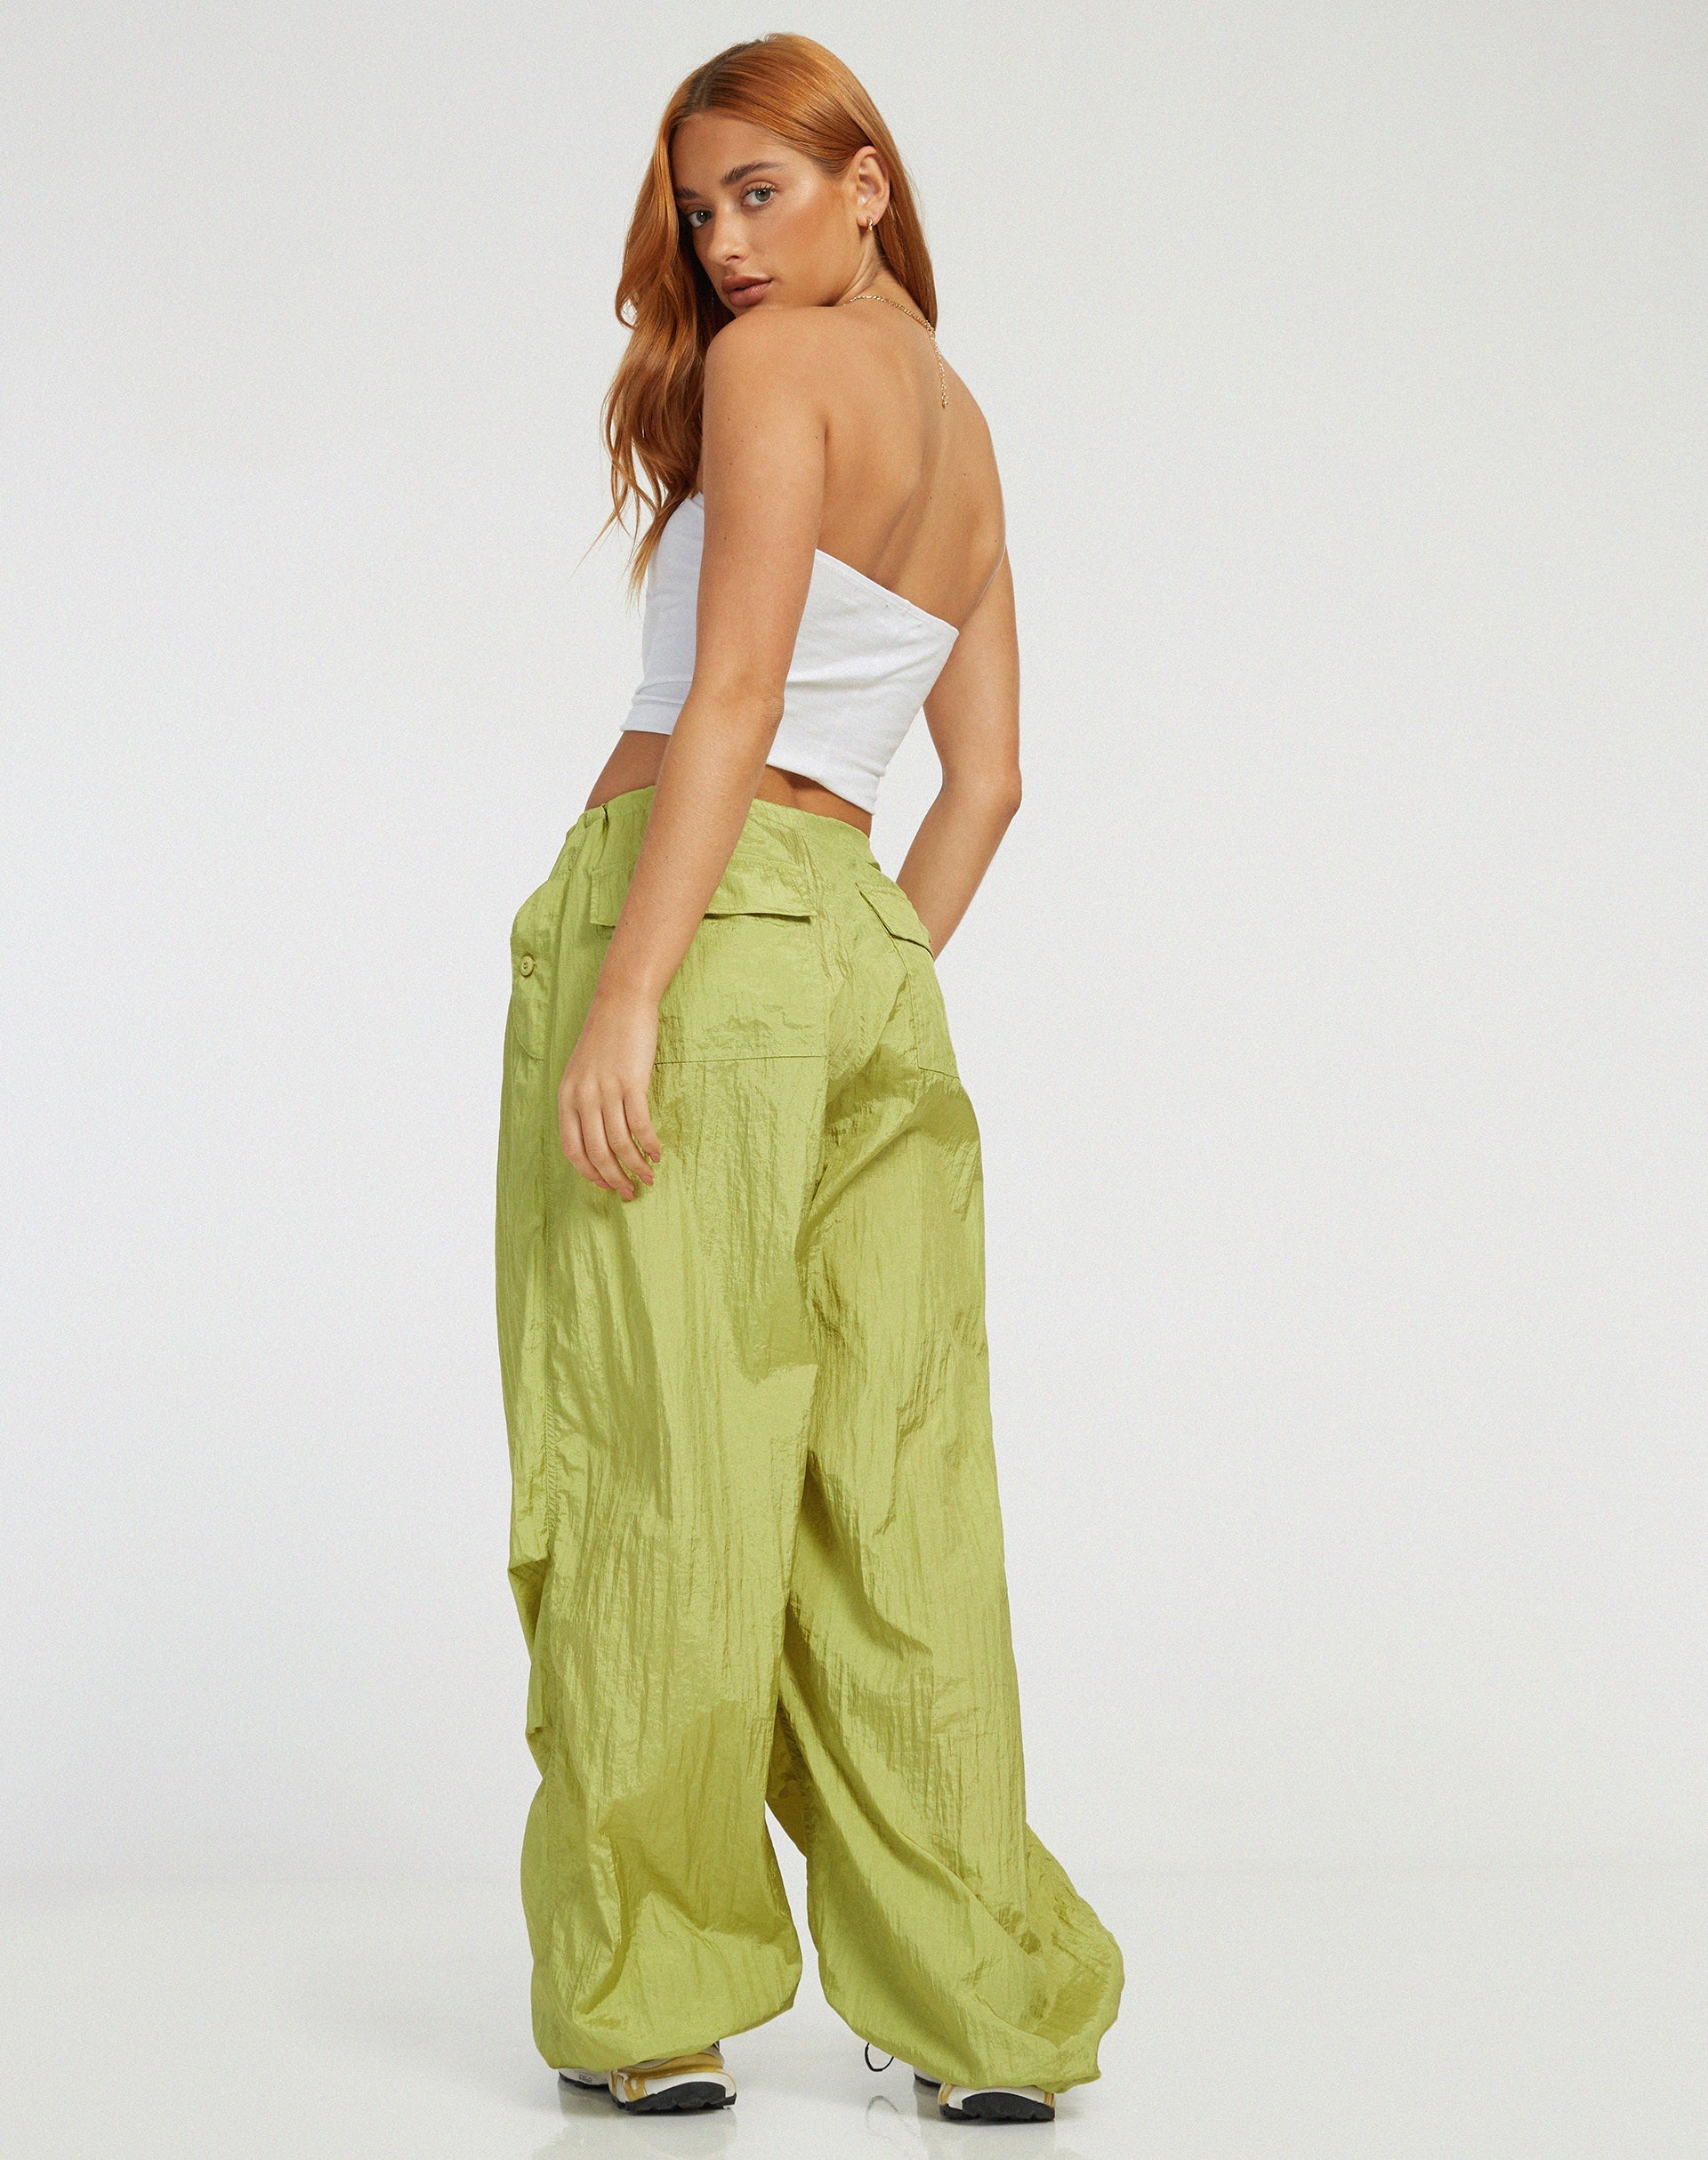 image of Chute Trouser in Pear Green